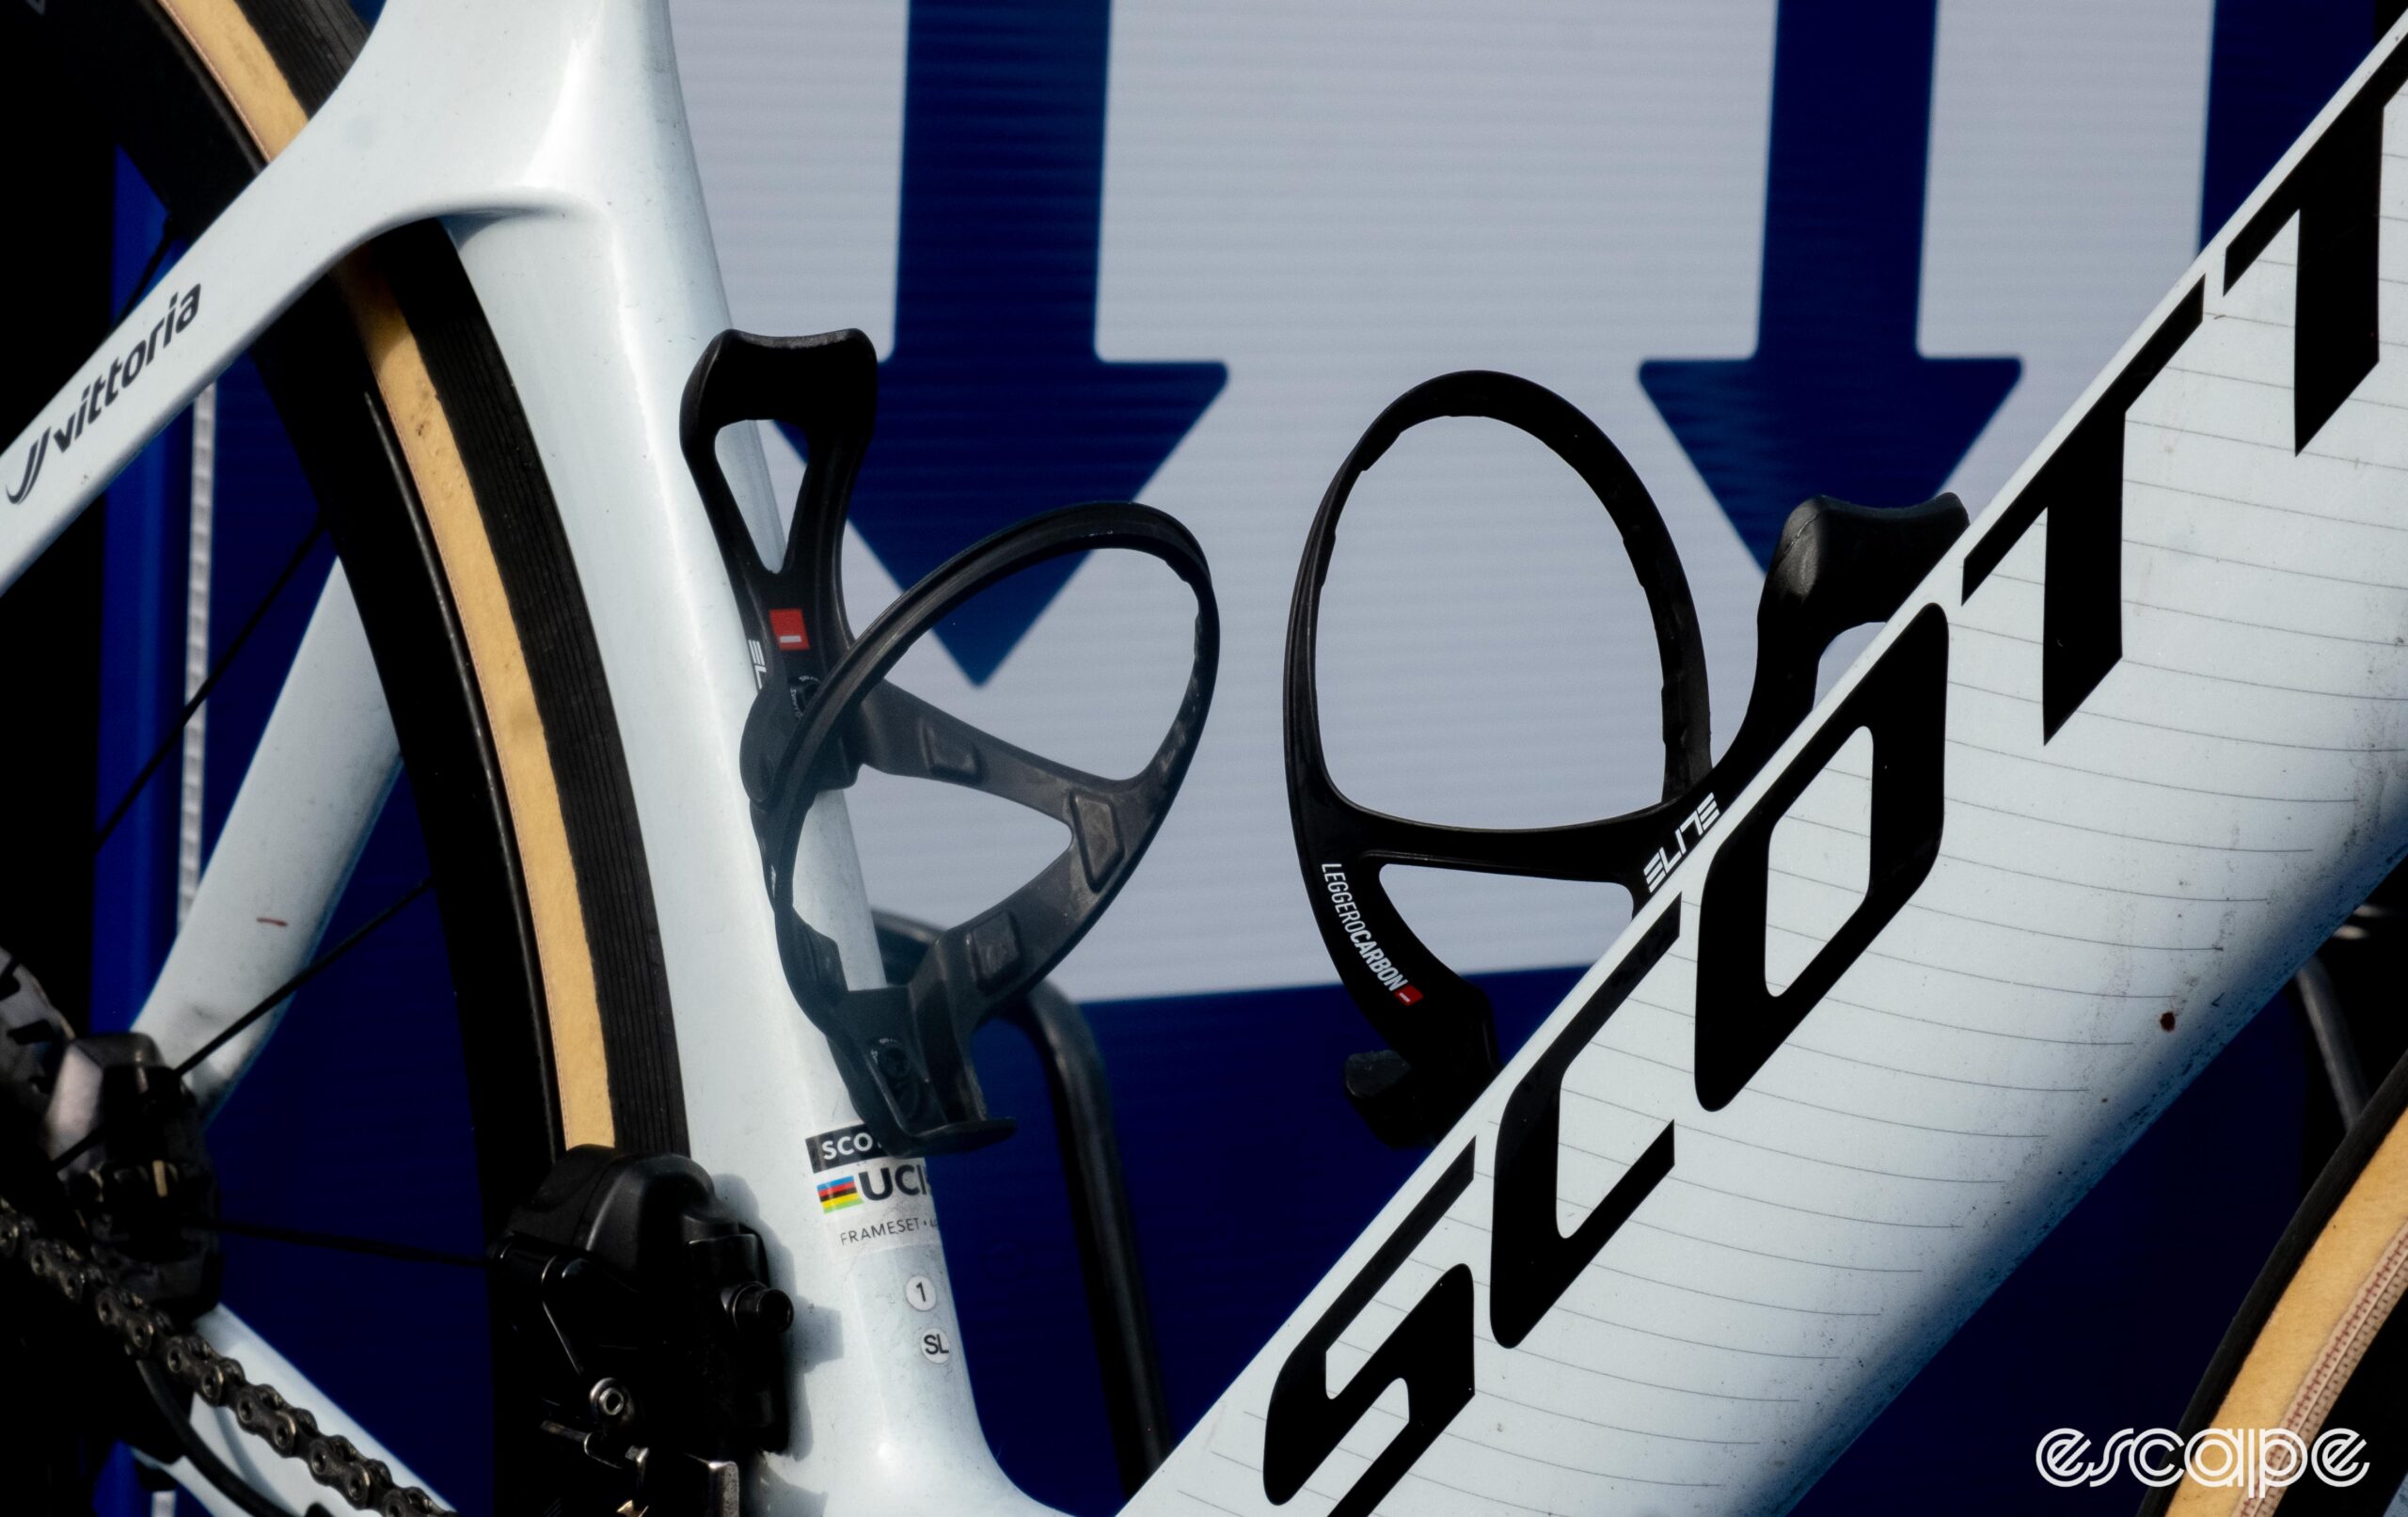 The photo shows Bardet's bottle cages. 